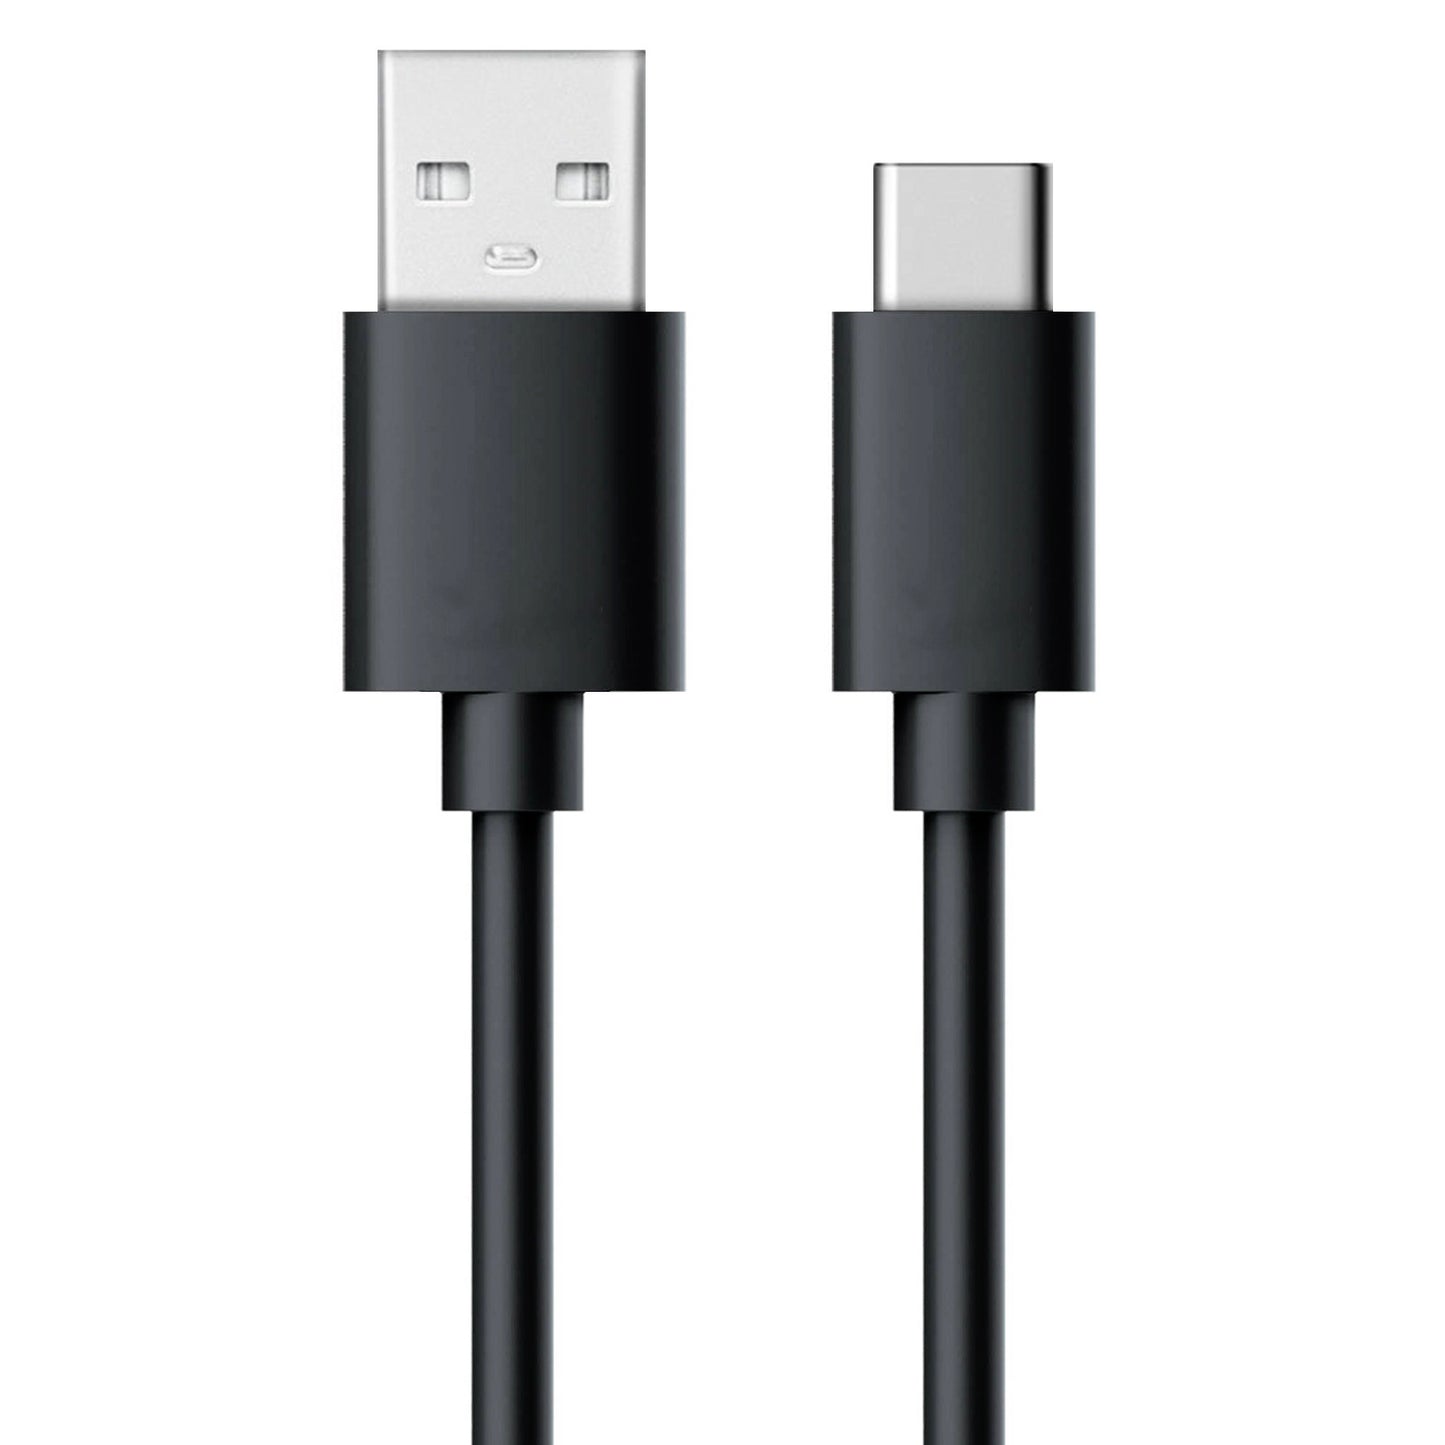 For USB TYPE-C